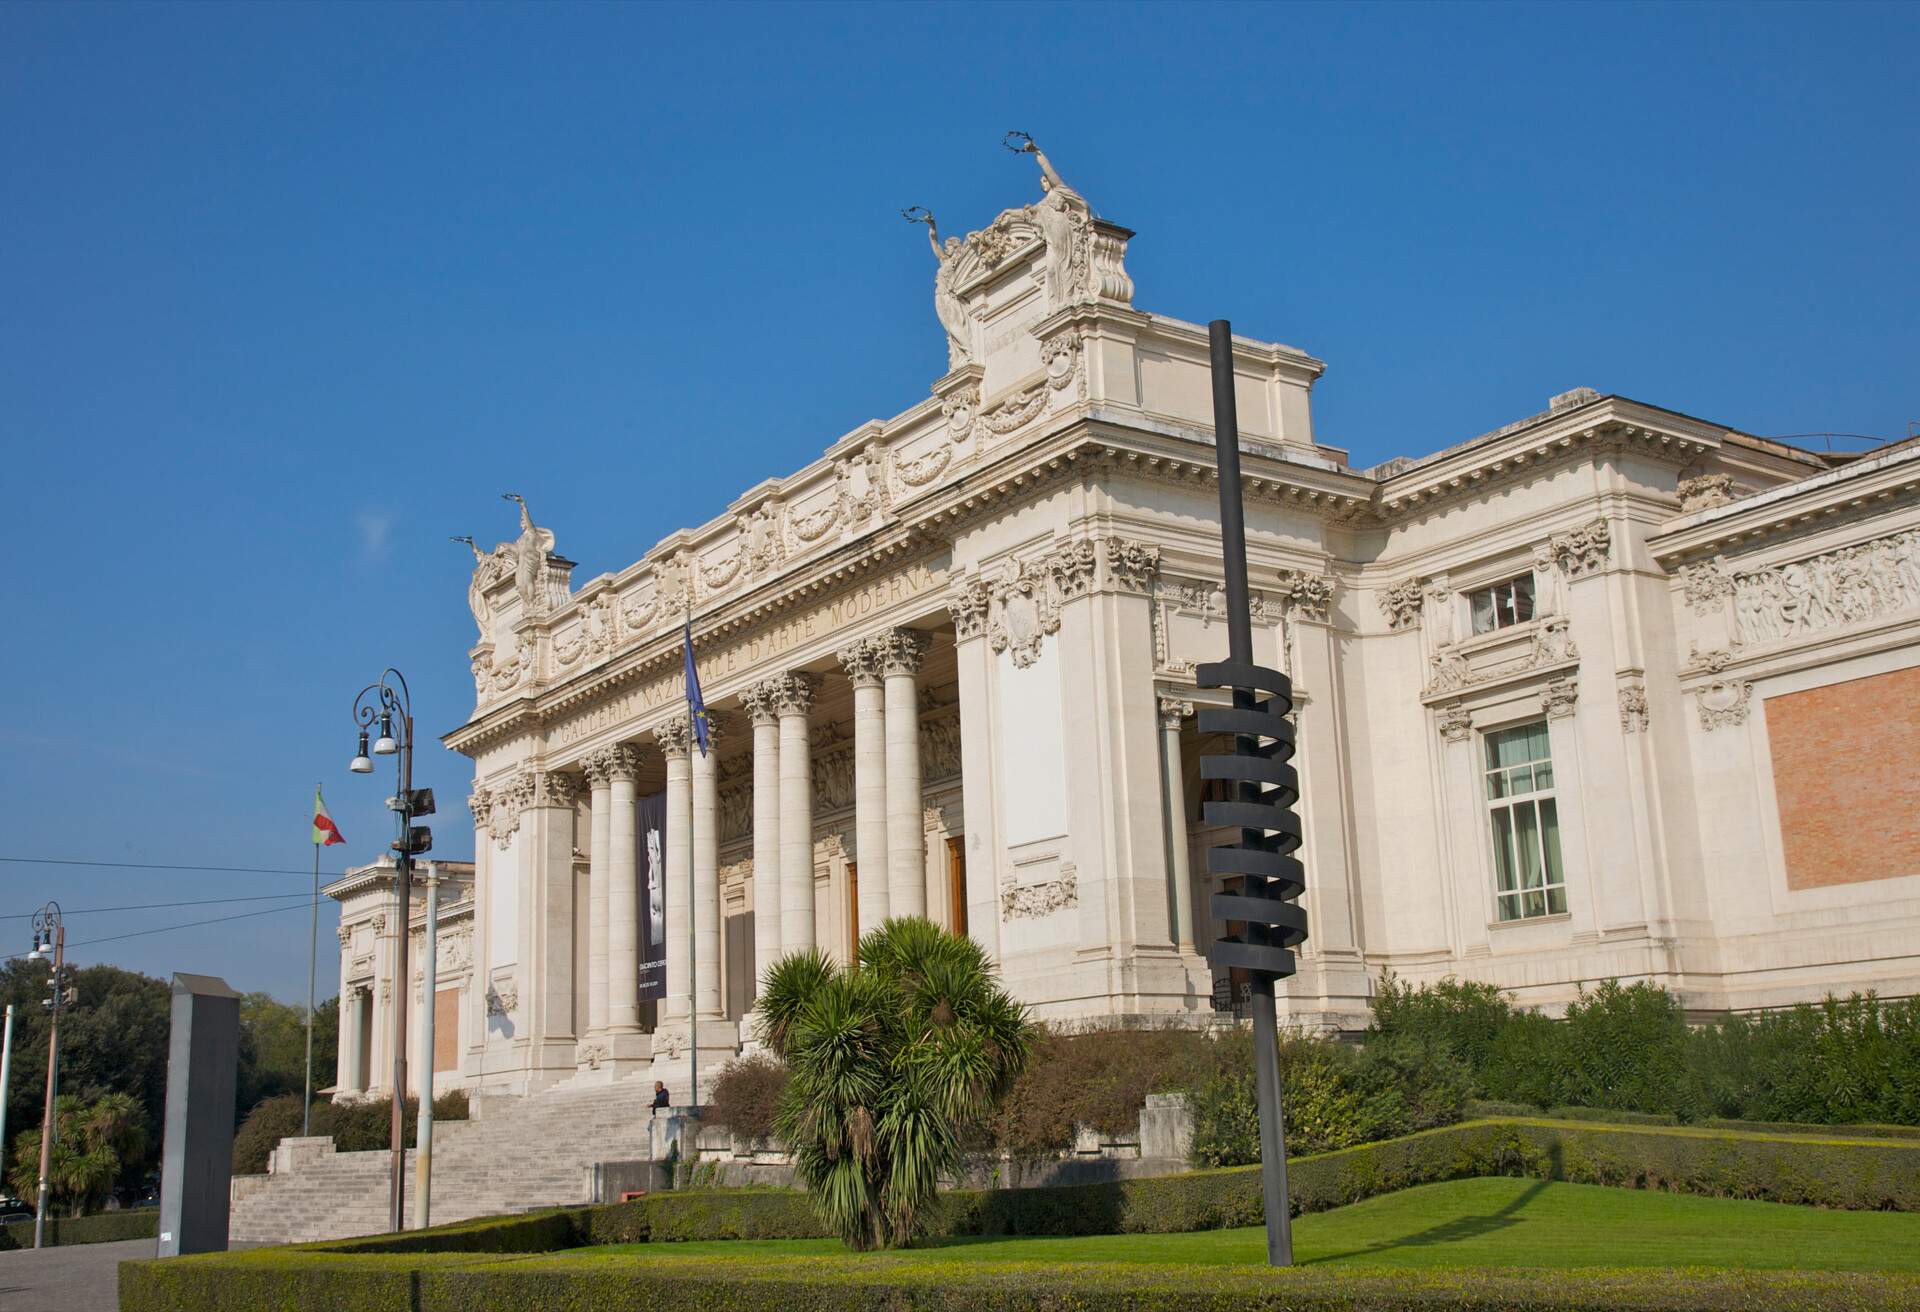 National Gallery of Modern Art (Galleria Nazionale d'Arte Moderna) on Viale delle Belle Arti houses collection of 19th and 20th century paintings.  Built 1911 in Neoclassical style by Cesare Bazzani.